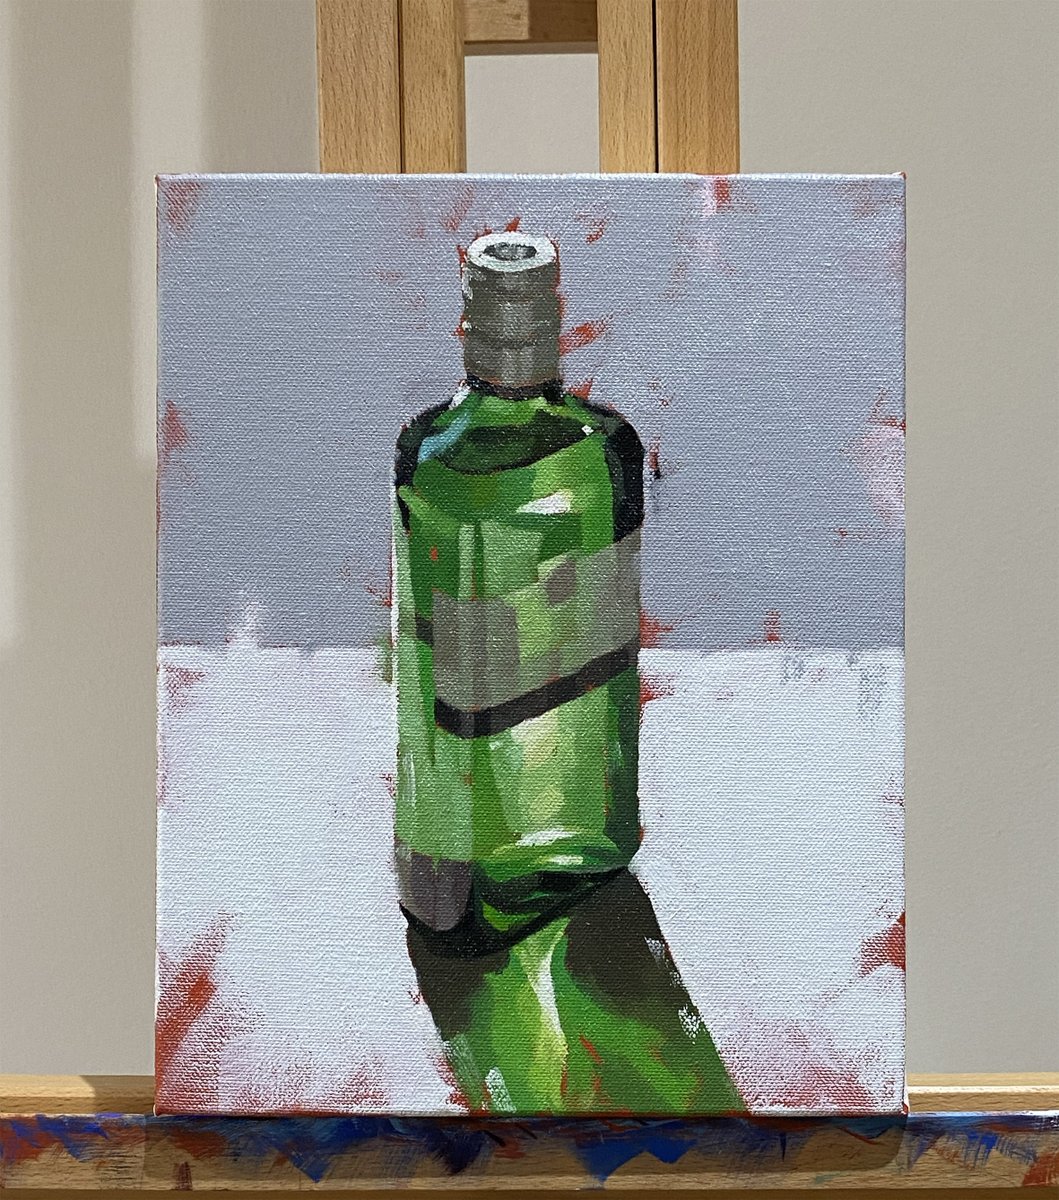 Stick a bottle of gin on the kitchen table with low morning sunlight and something happens. Special appreciation to the marmalade jar that started it.
#stilllife #originalart #painting #fineartist #gin